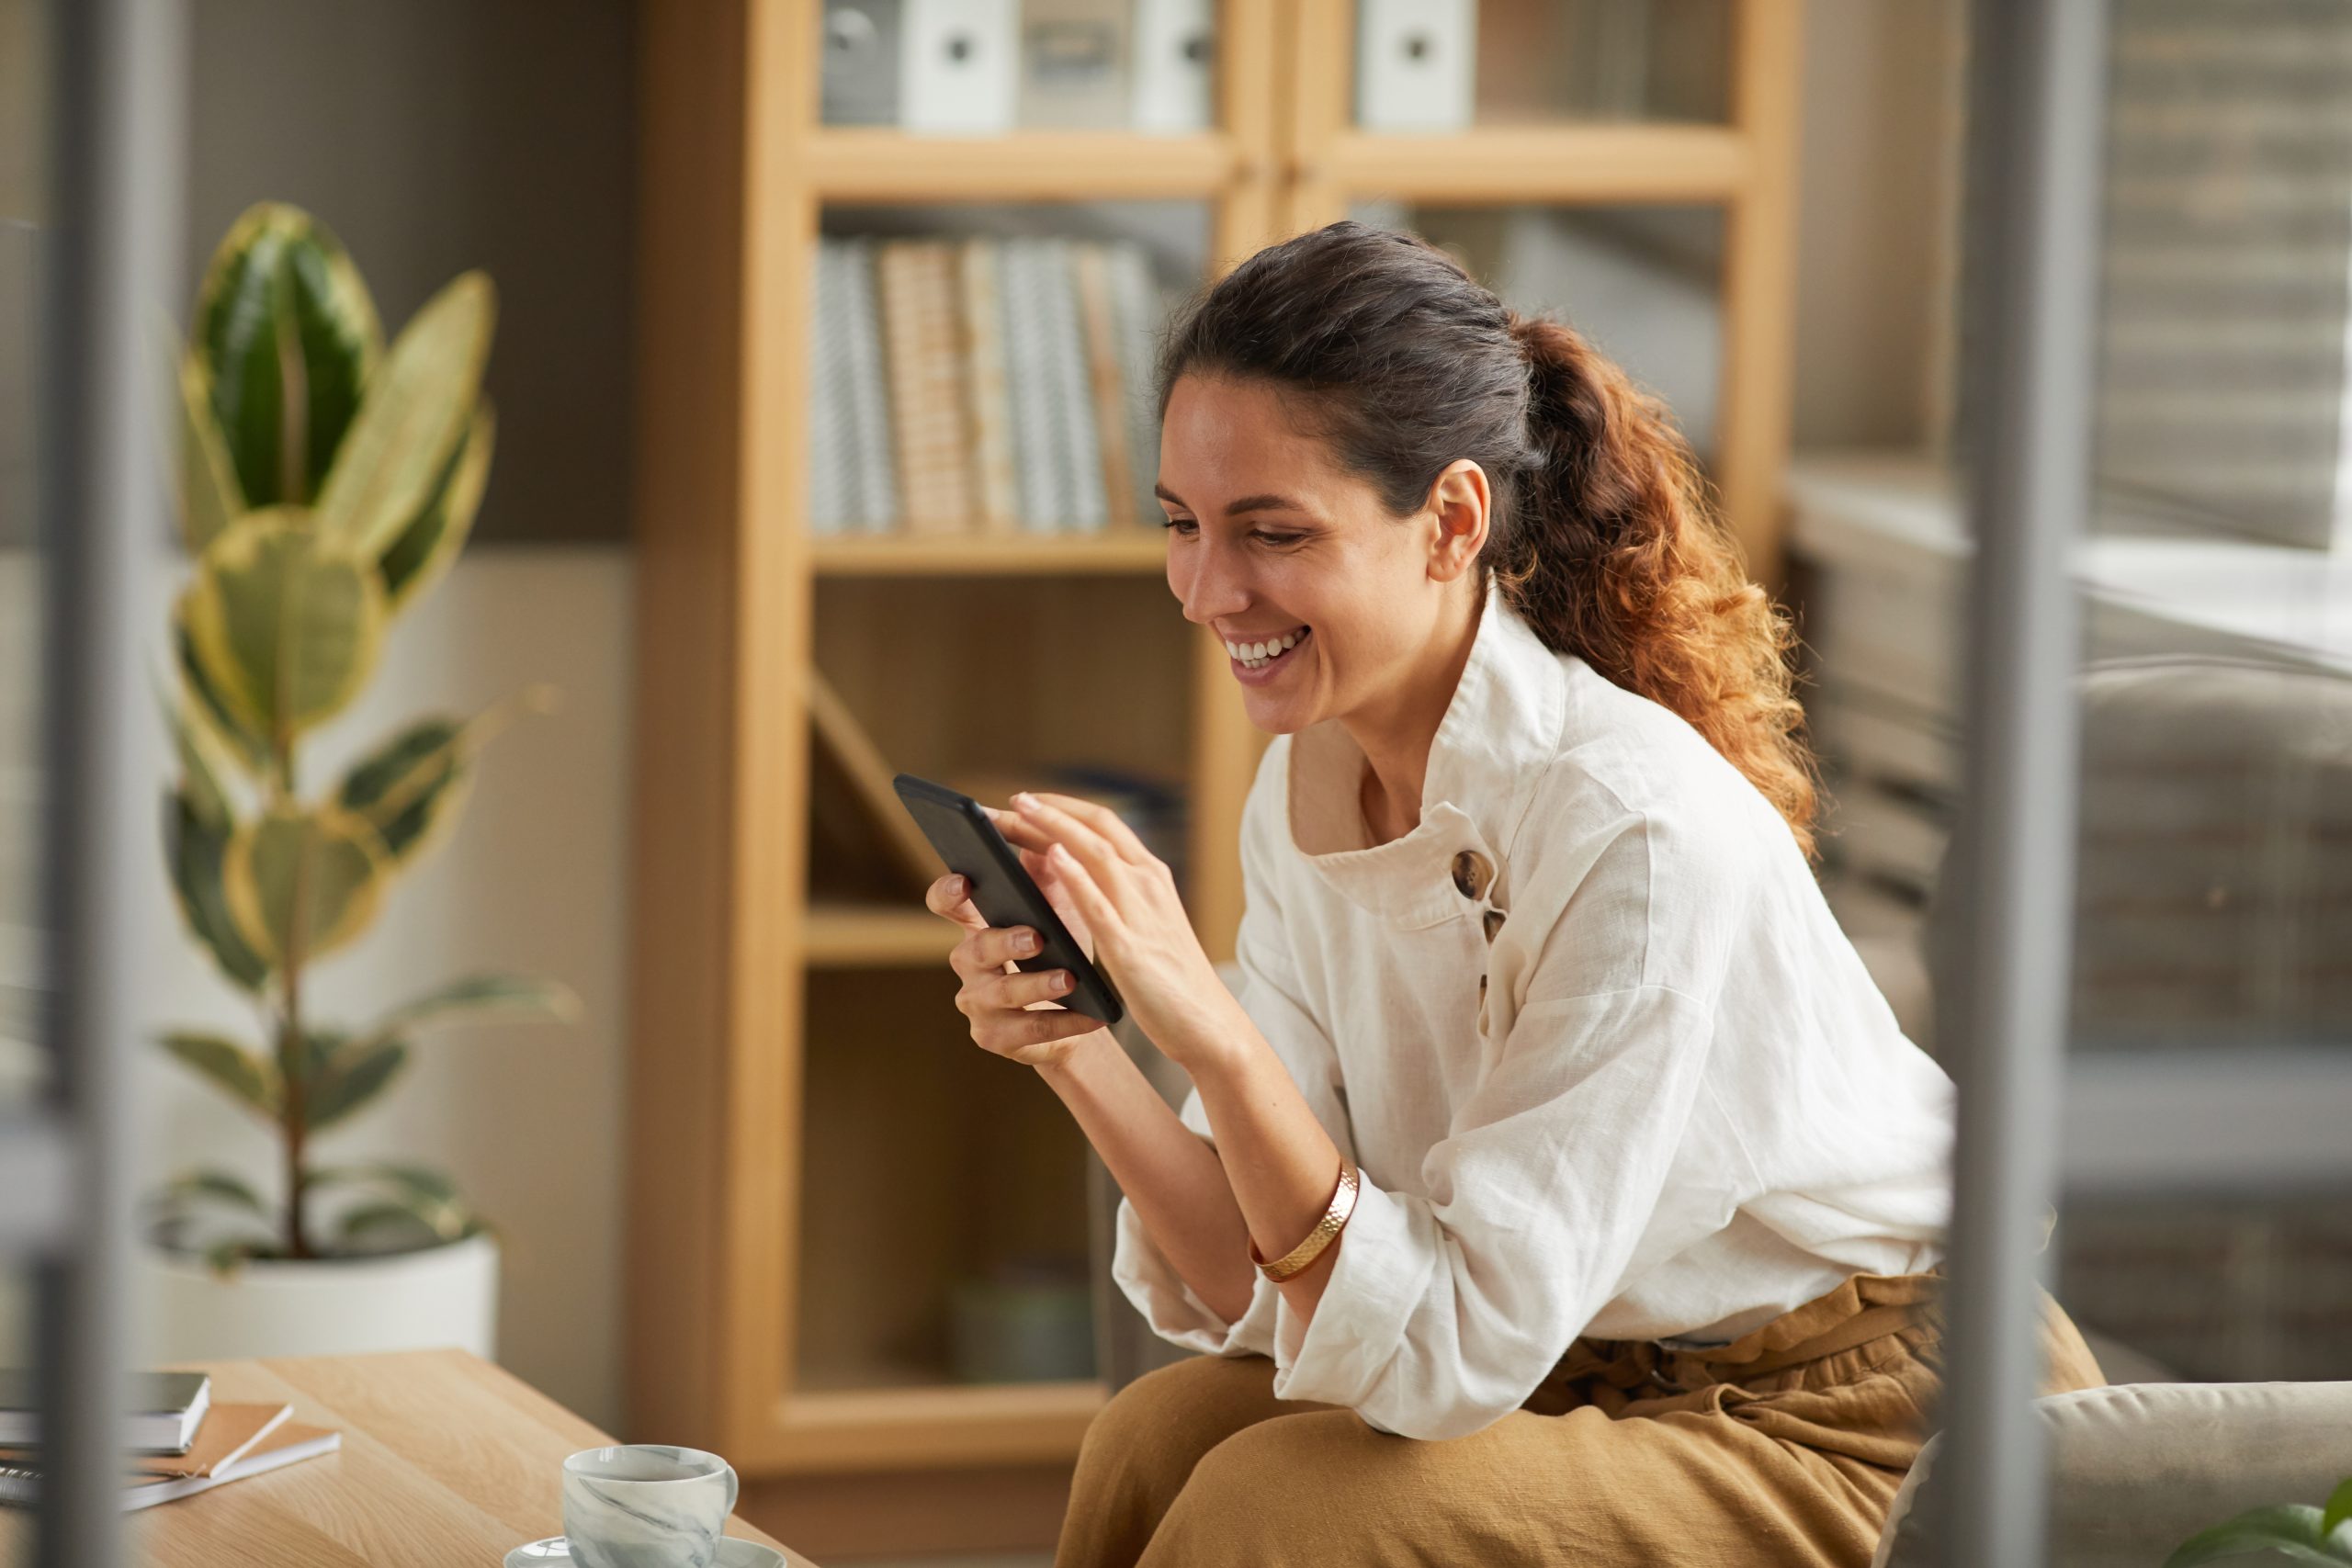 Smiling Businesswoman Looking at Smartphone Screen